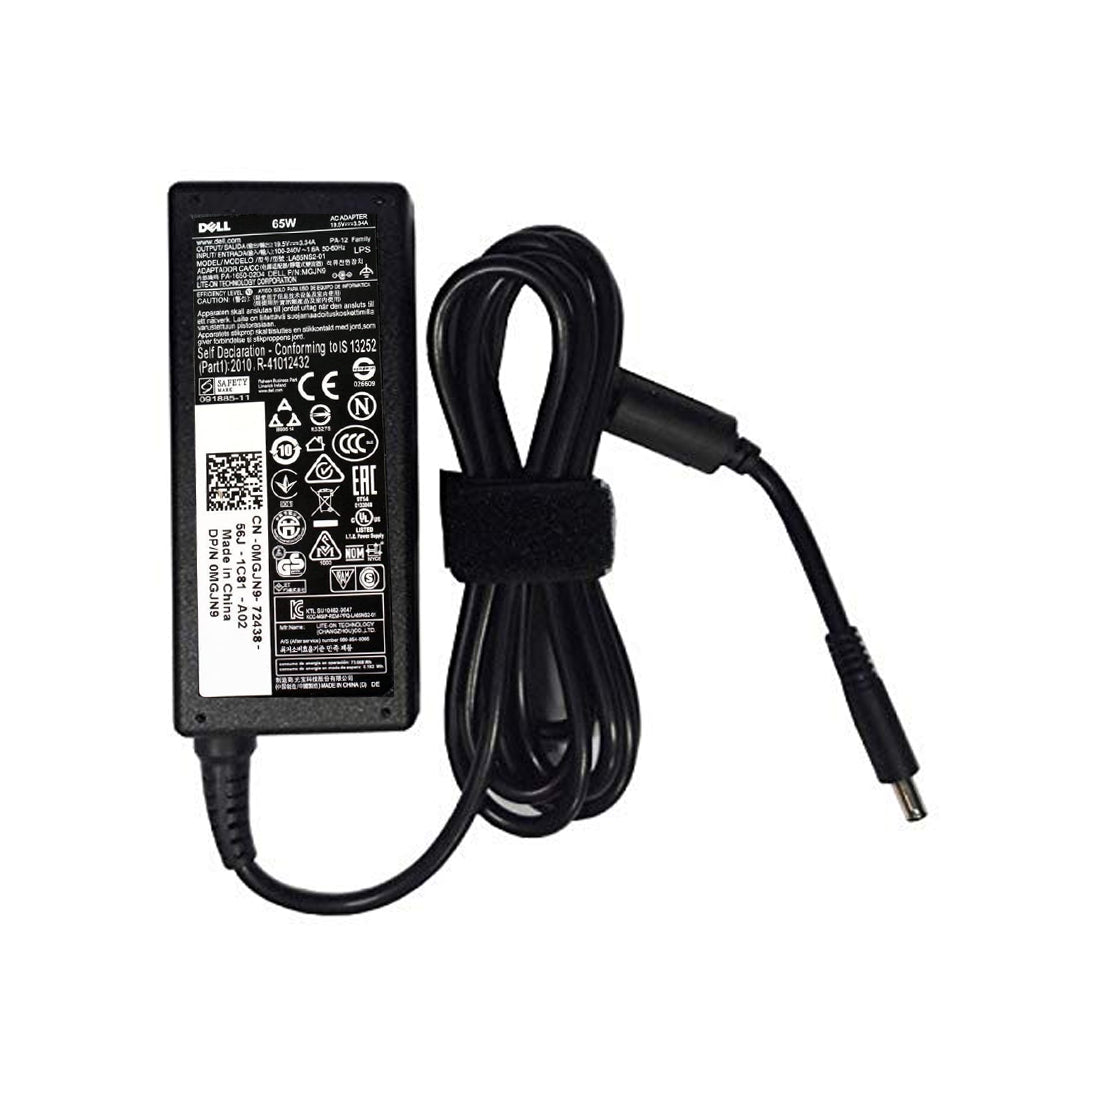 Dell Original 65W 19.5V 4.5mm Pin Laptop Charger Adapter for Inspiron 17 5765 With Power Cord